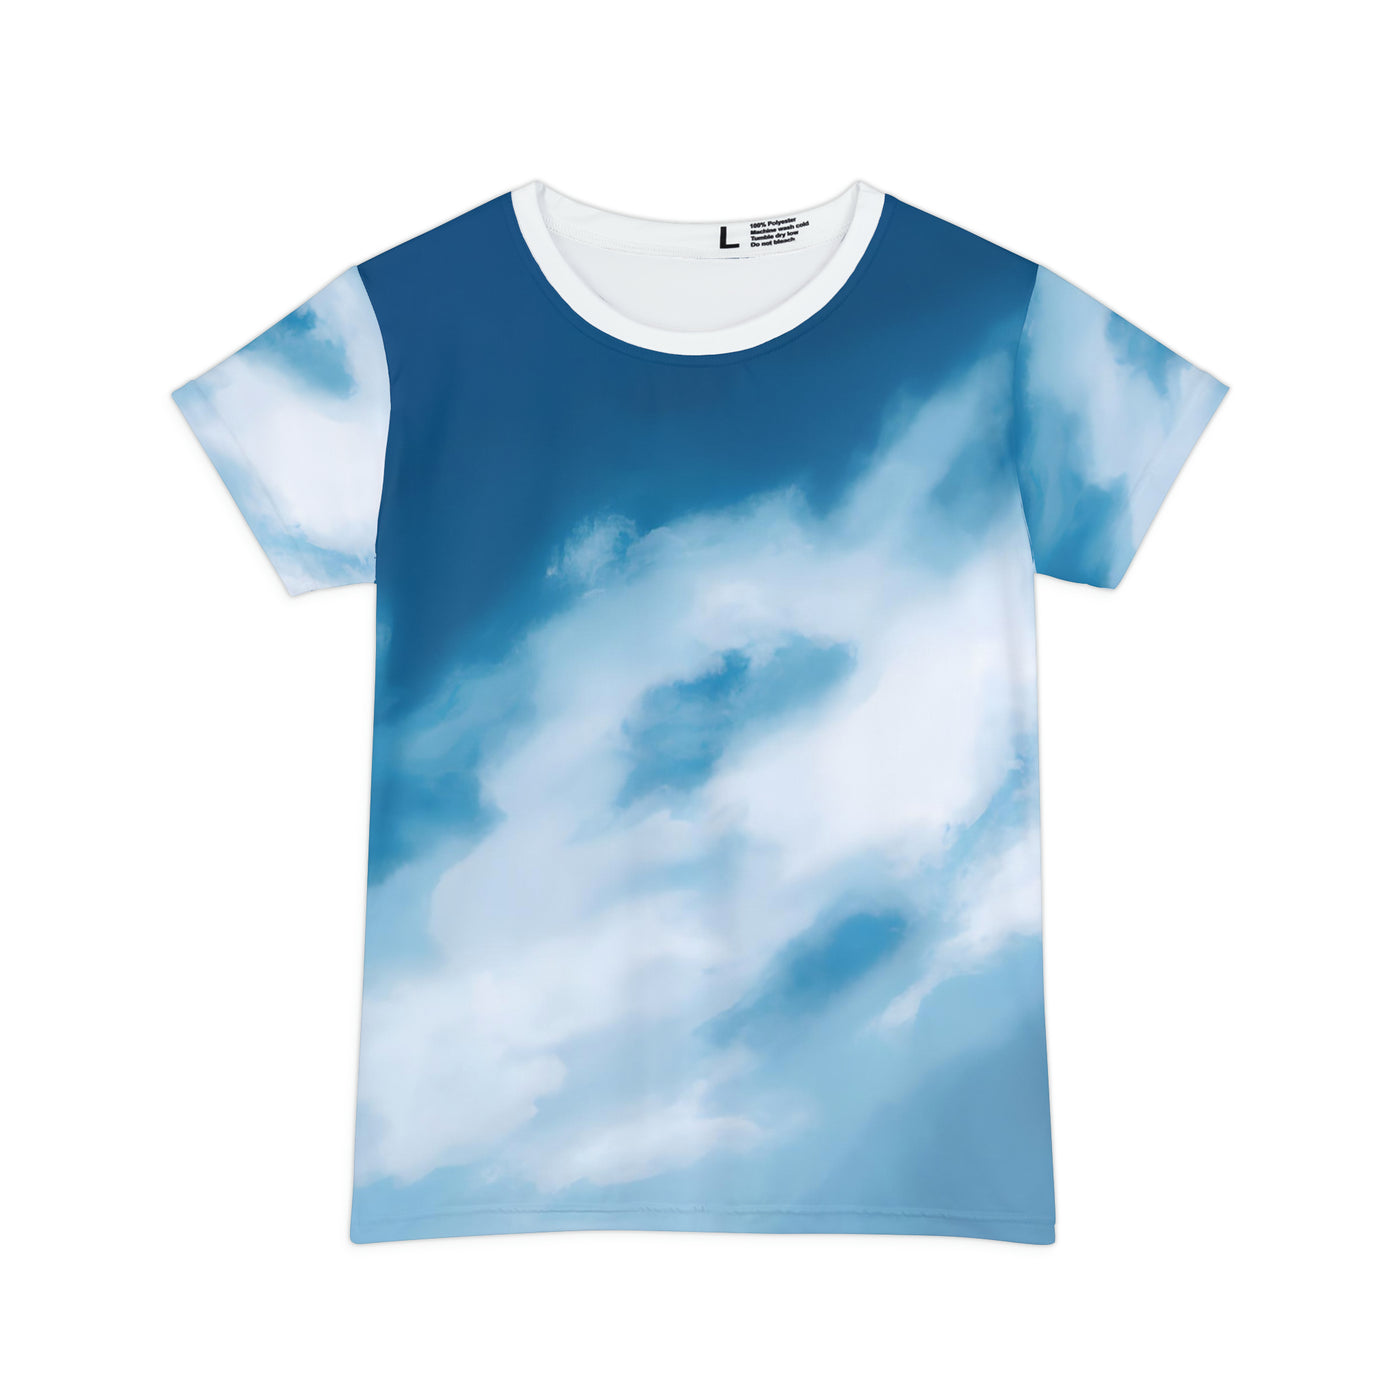 "Amazingly Awesome, Cloudy Skies!" Women's Short Sleeve Shirt